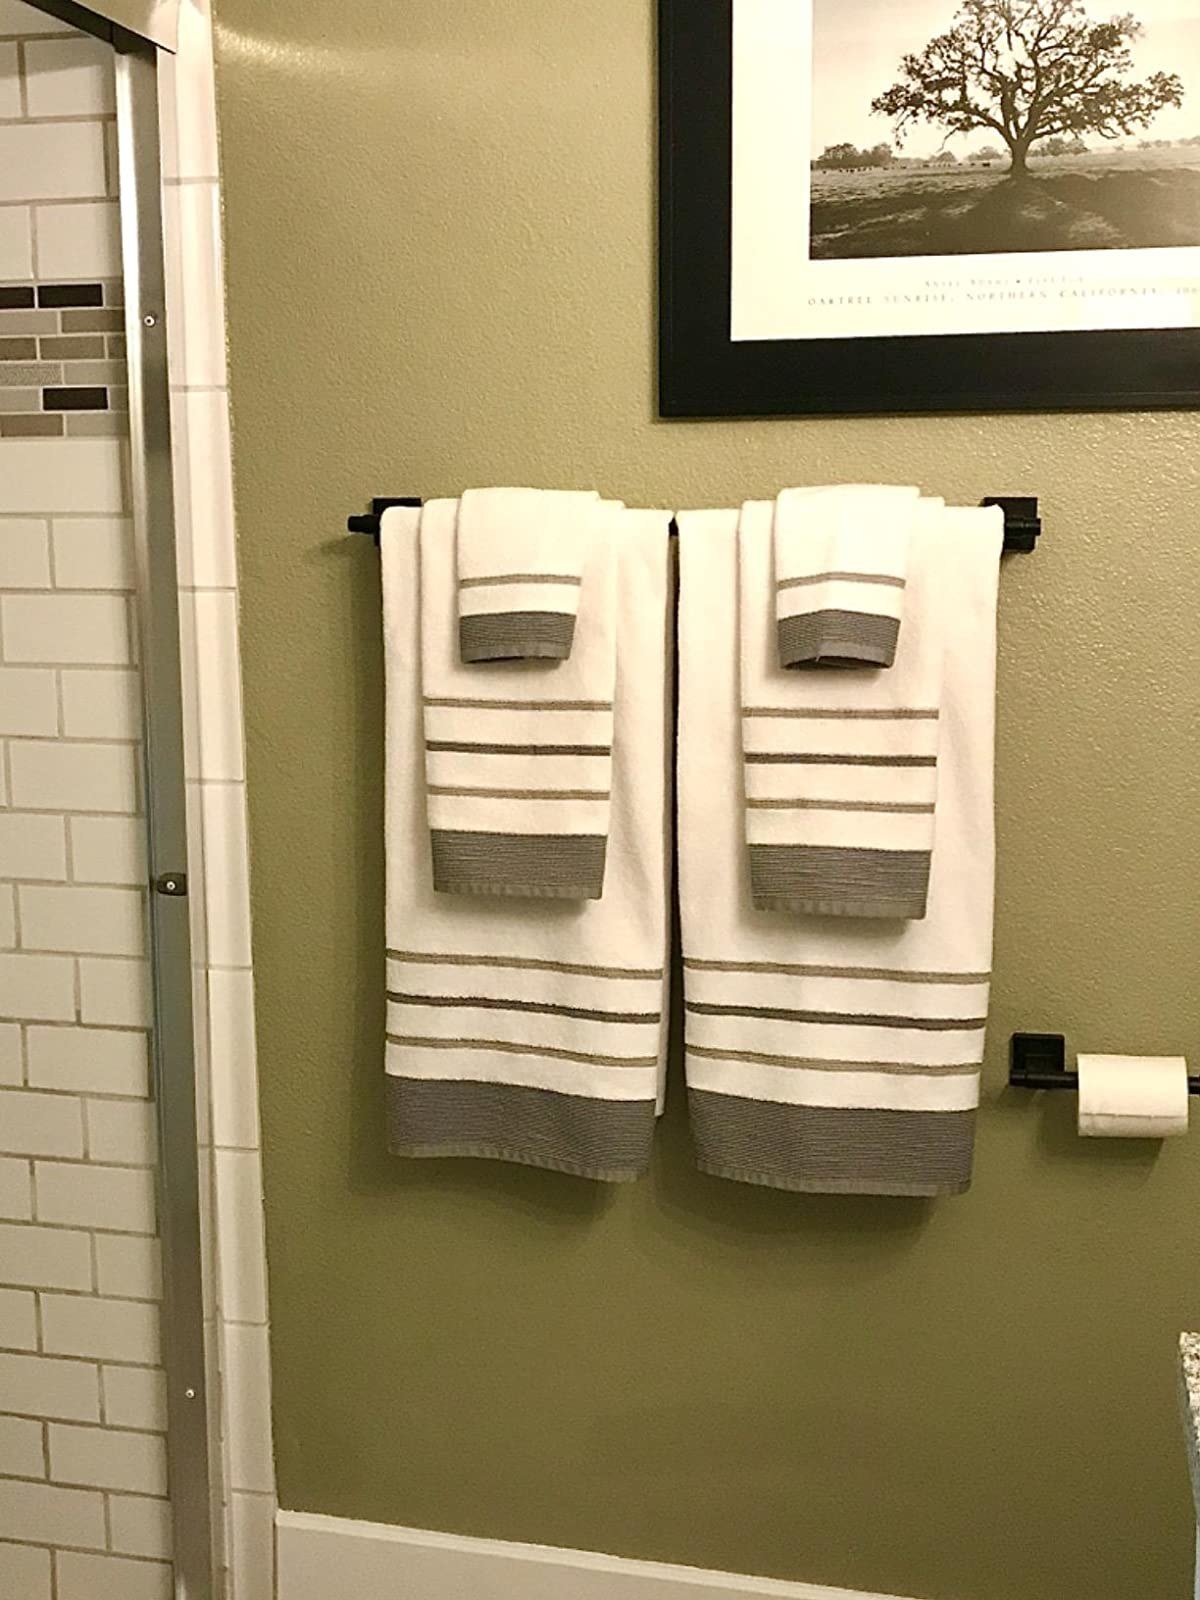 The striped towels in a coordinating bathroom